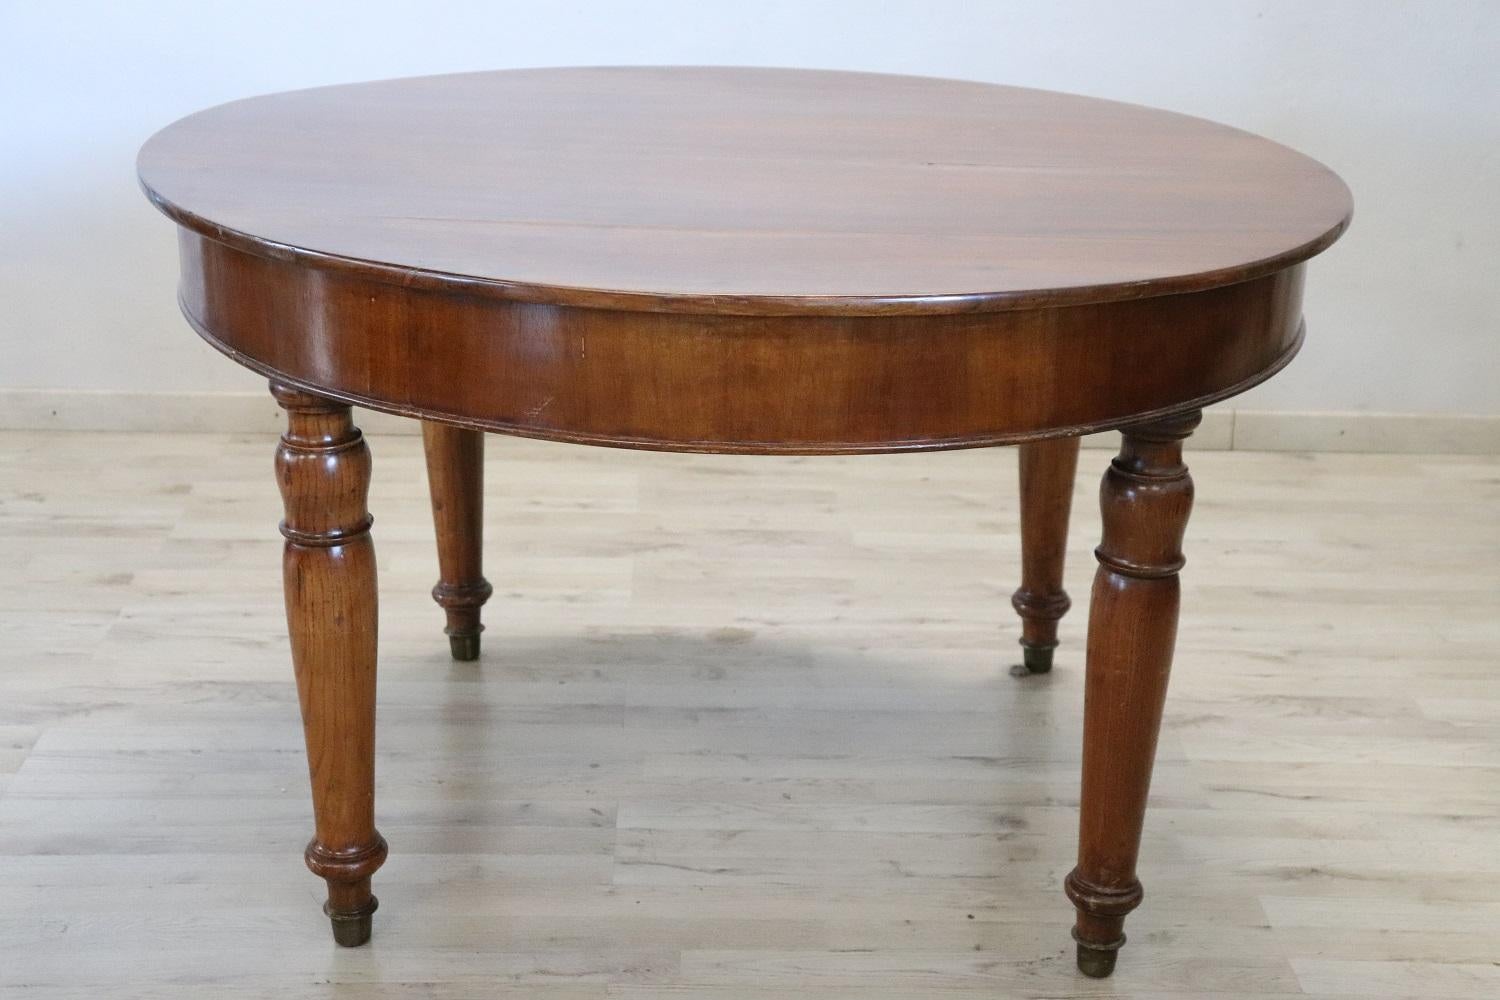 Beautiful important antique round dining room table, 1840s in solid walnut wood. This table is perfect for a dining room, it extends into the center becoming a large table that can accommodate many people. The four legs are elegant and slender. The